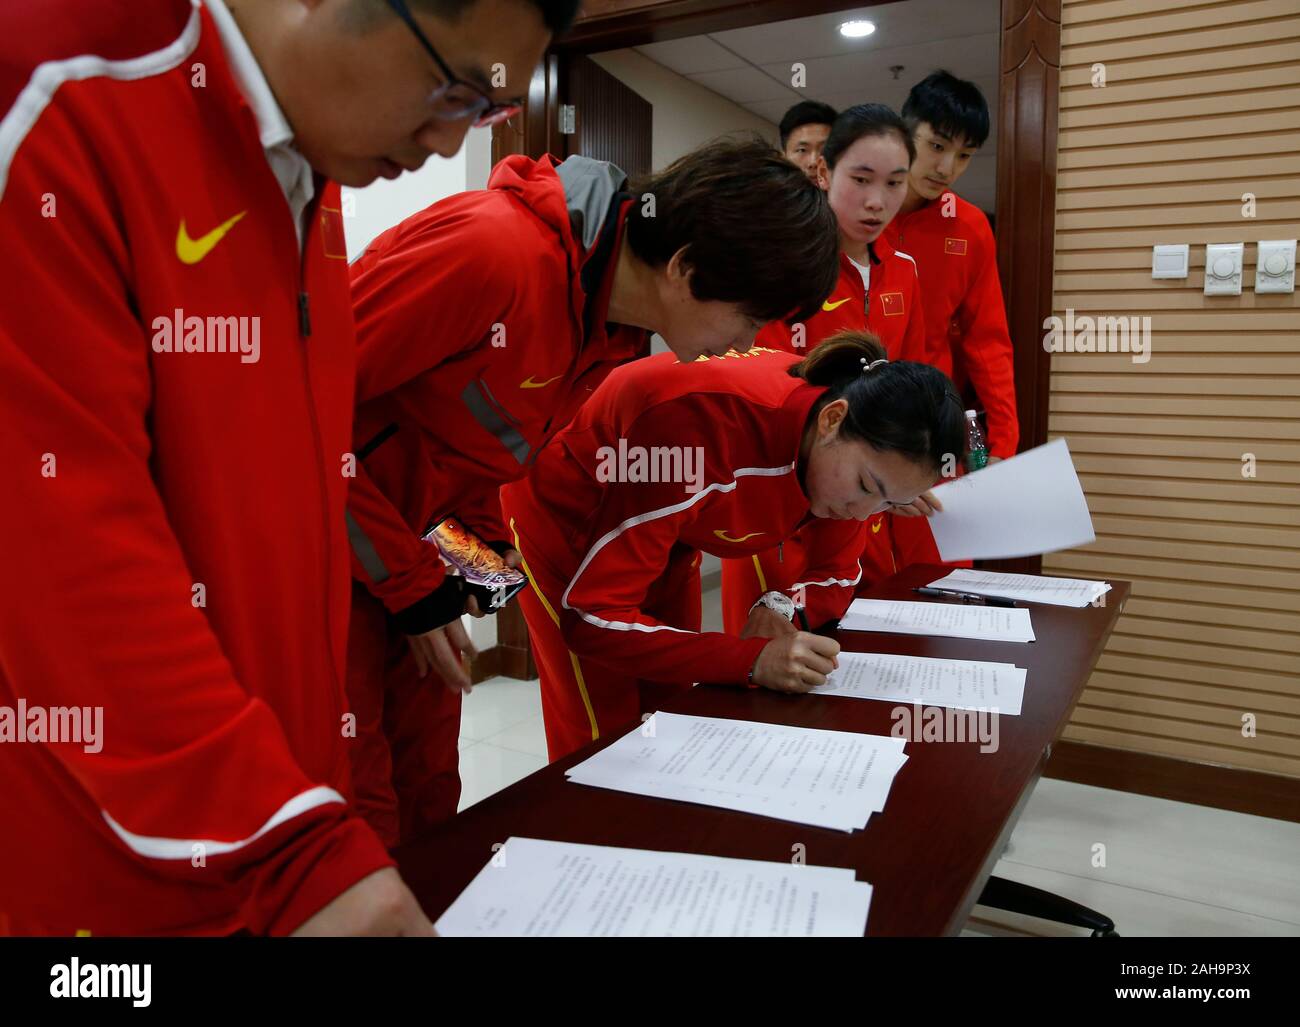 (191227) -- BEIJING, Dec. 27, 2019 (Xinhua) -- File photo taken on April 17, 2019 shows athletes from China's national track and field team sign on Anti-Doping Committment for Asian Athletics Championships 2019 in Beijing, capital of China. On November 18, China's Supreme People's Court issued a judicial interpretation on the handling of criminal cases related to the smuggling, illegal sale and use of athletic performance-enhancing drugs, which will take effect on January 1, 2020. The move will see harsher punishments for those behind illegal doping activities. (Xinhua/Ding Xu)TOP 10 CHINESE S Stock Photo